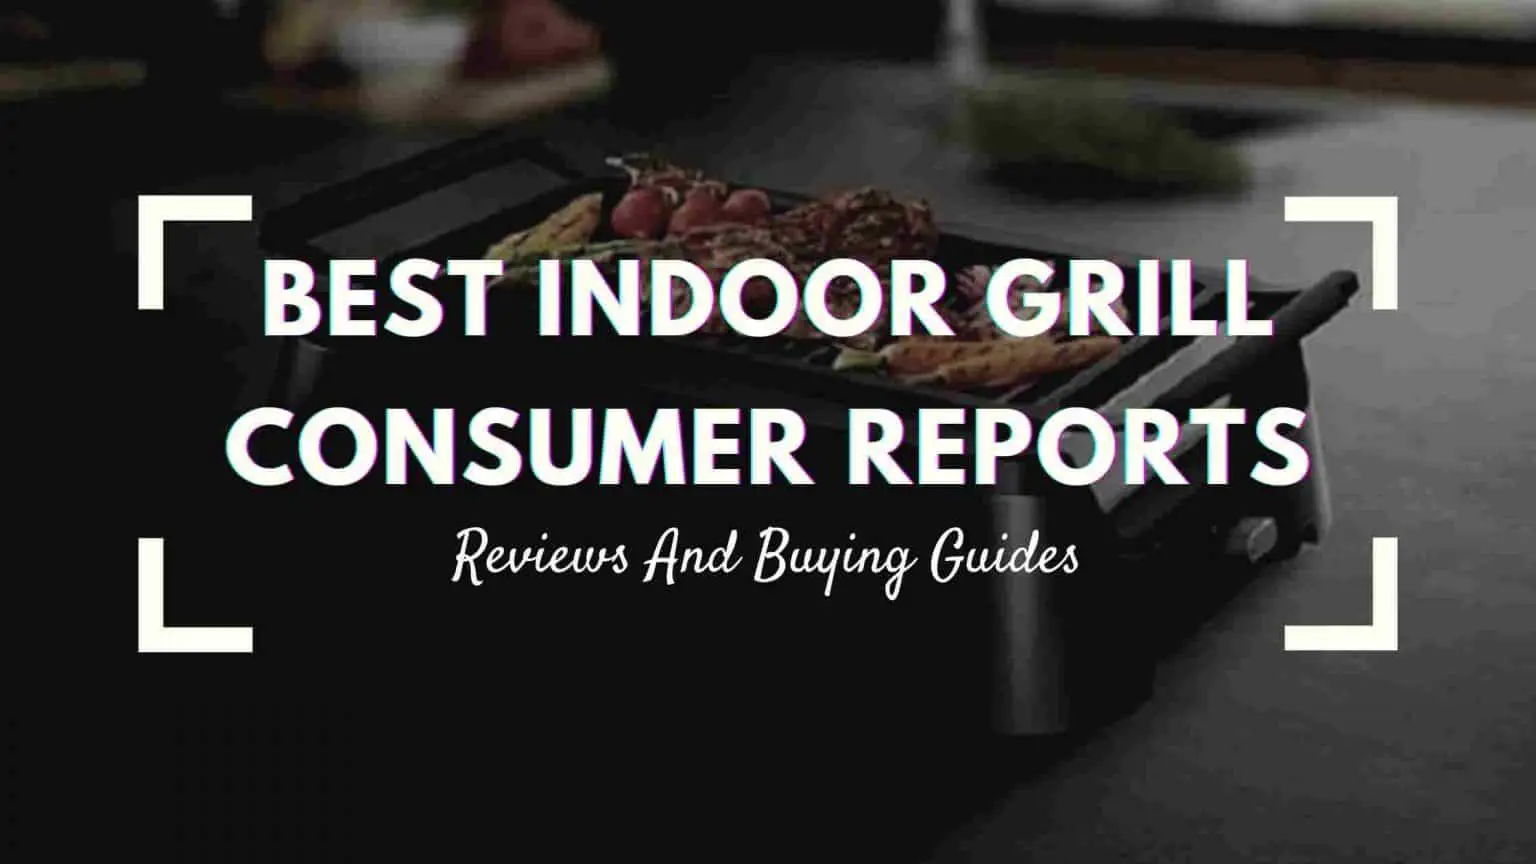 Top 17 Best Indoor Grill Consumer Reports: Reviews ...